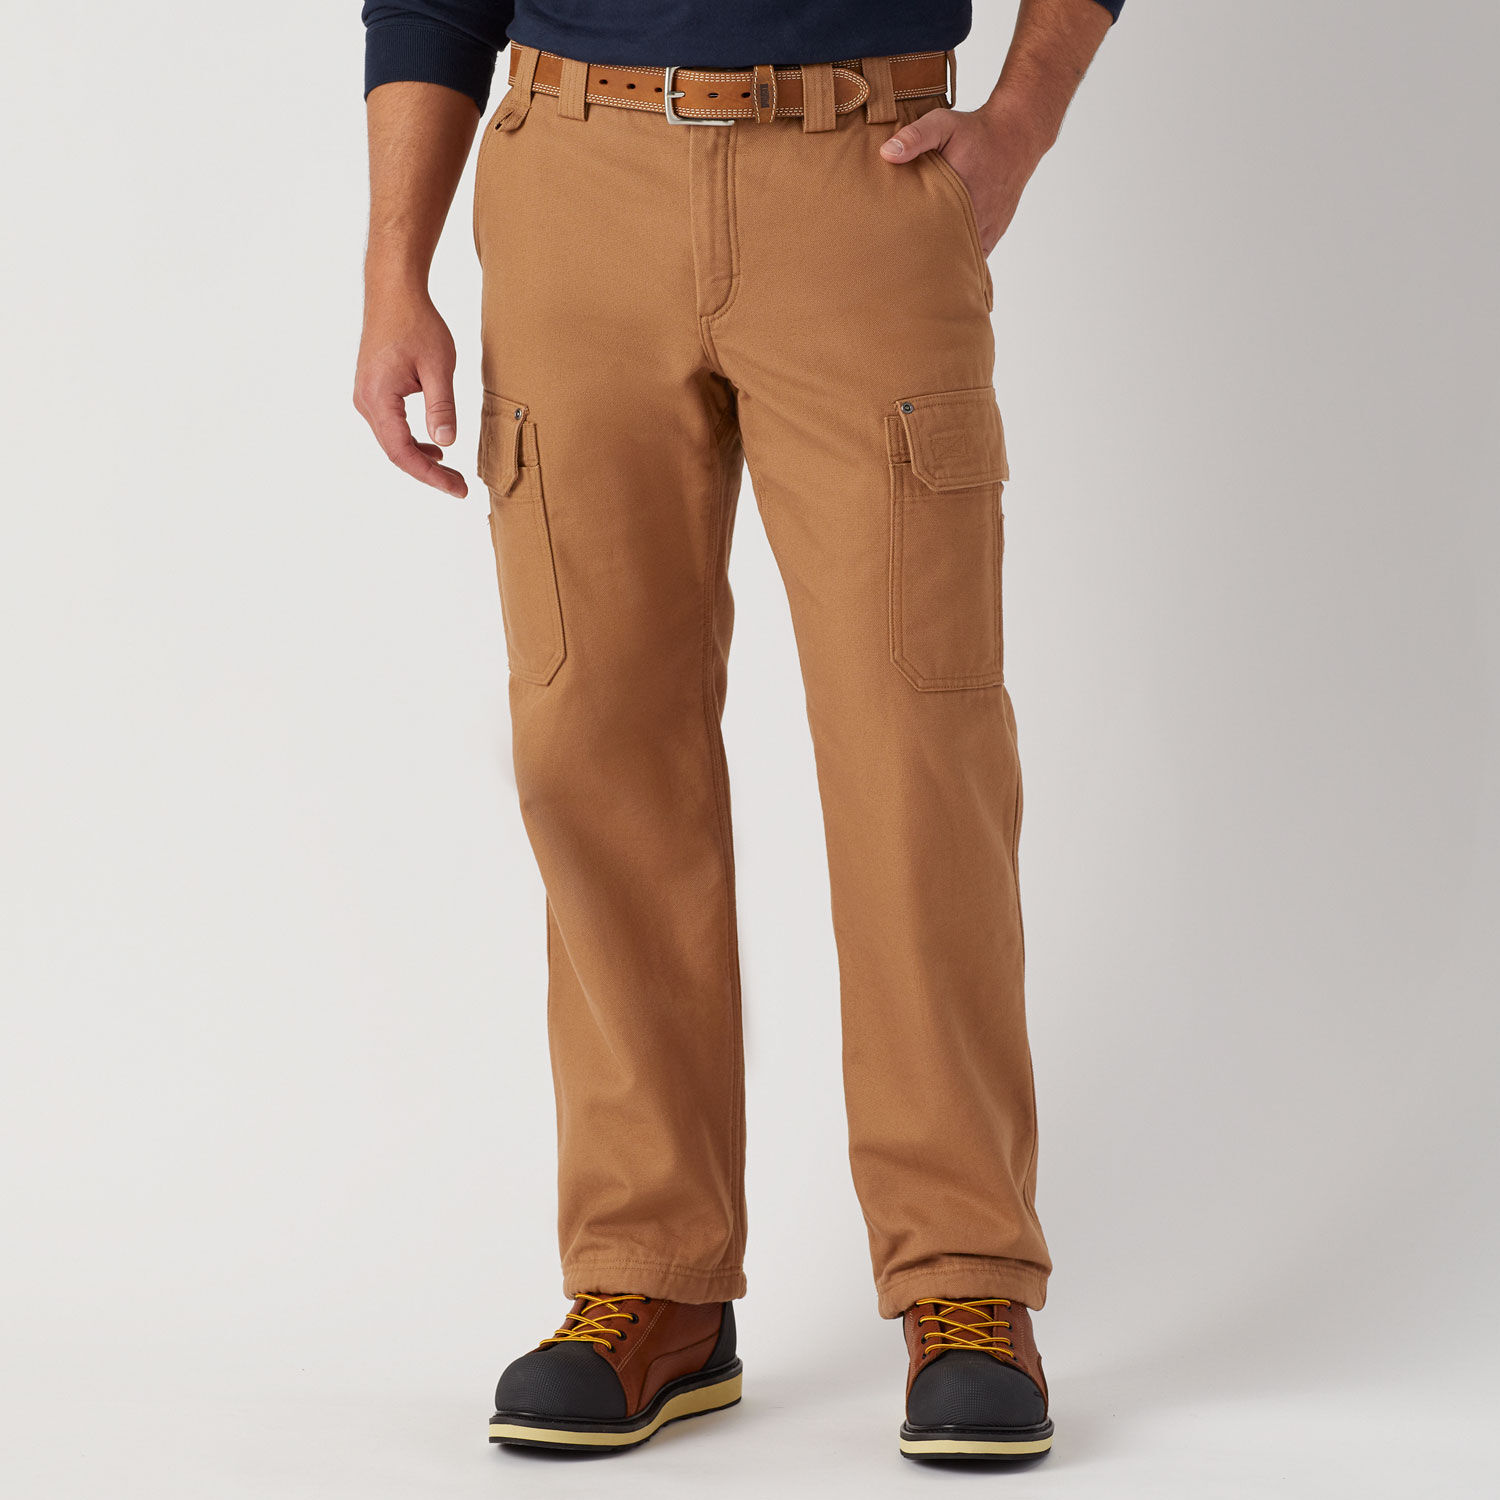 Mens Fire Hose FleeceLined Relaxed Fit Pants  Duluth Trading Company